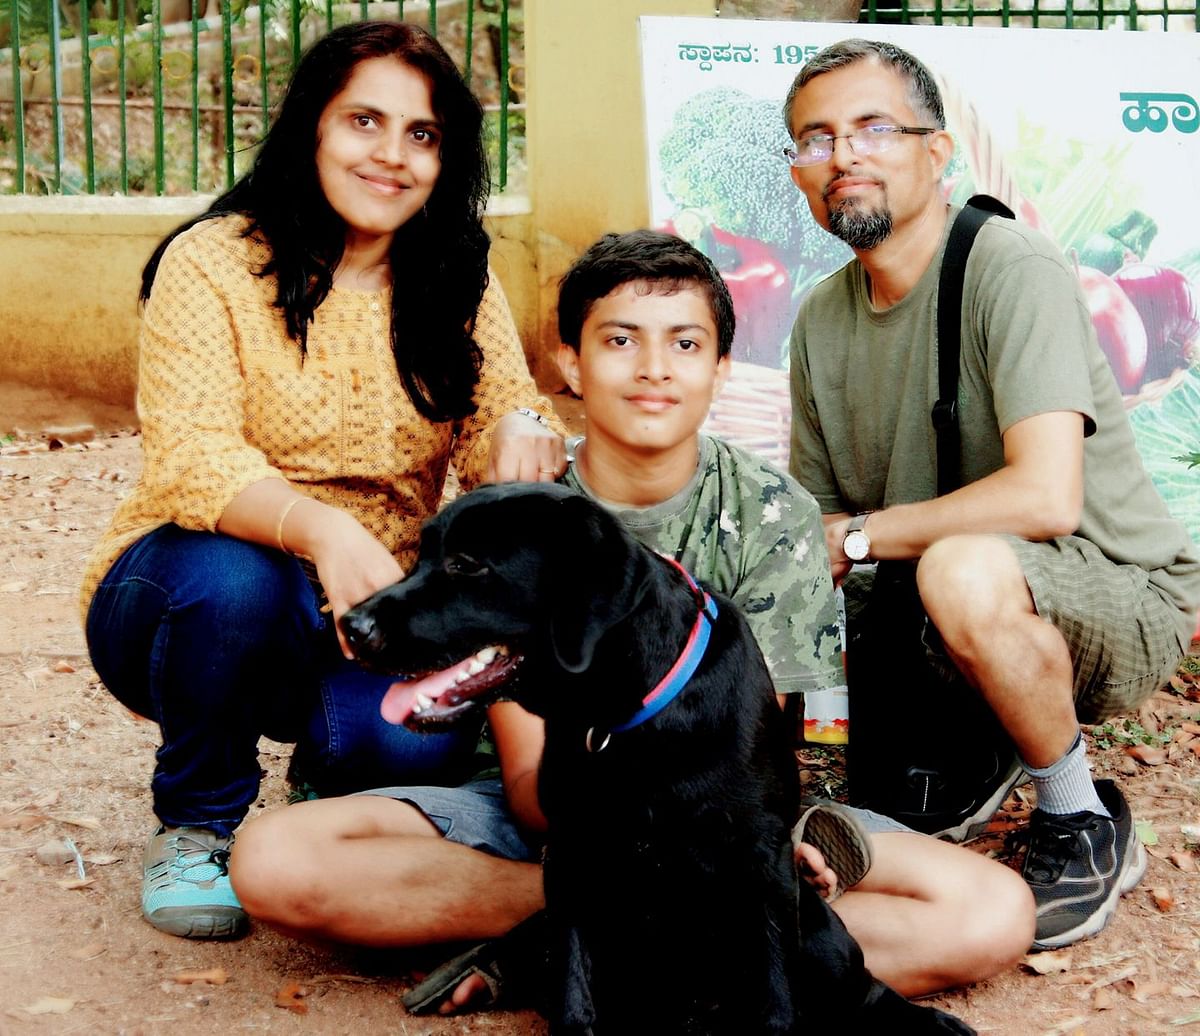 Vivek’s parents  recognised their son’s carpentry skills early on and helped him pursue his dreams.